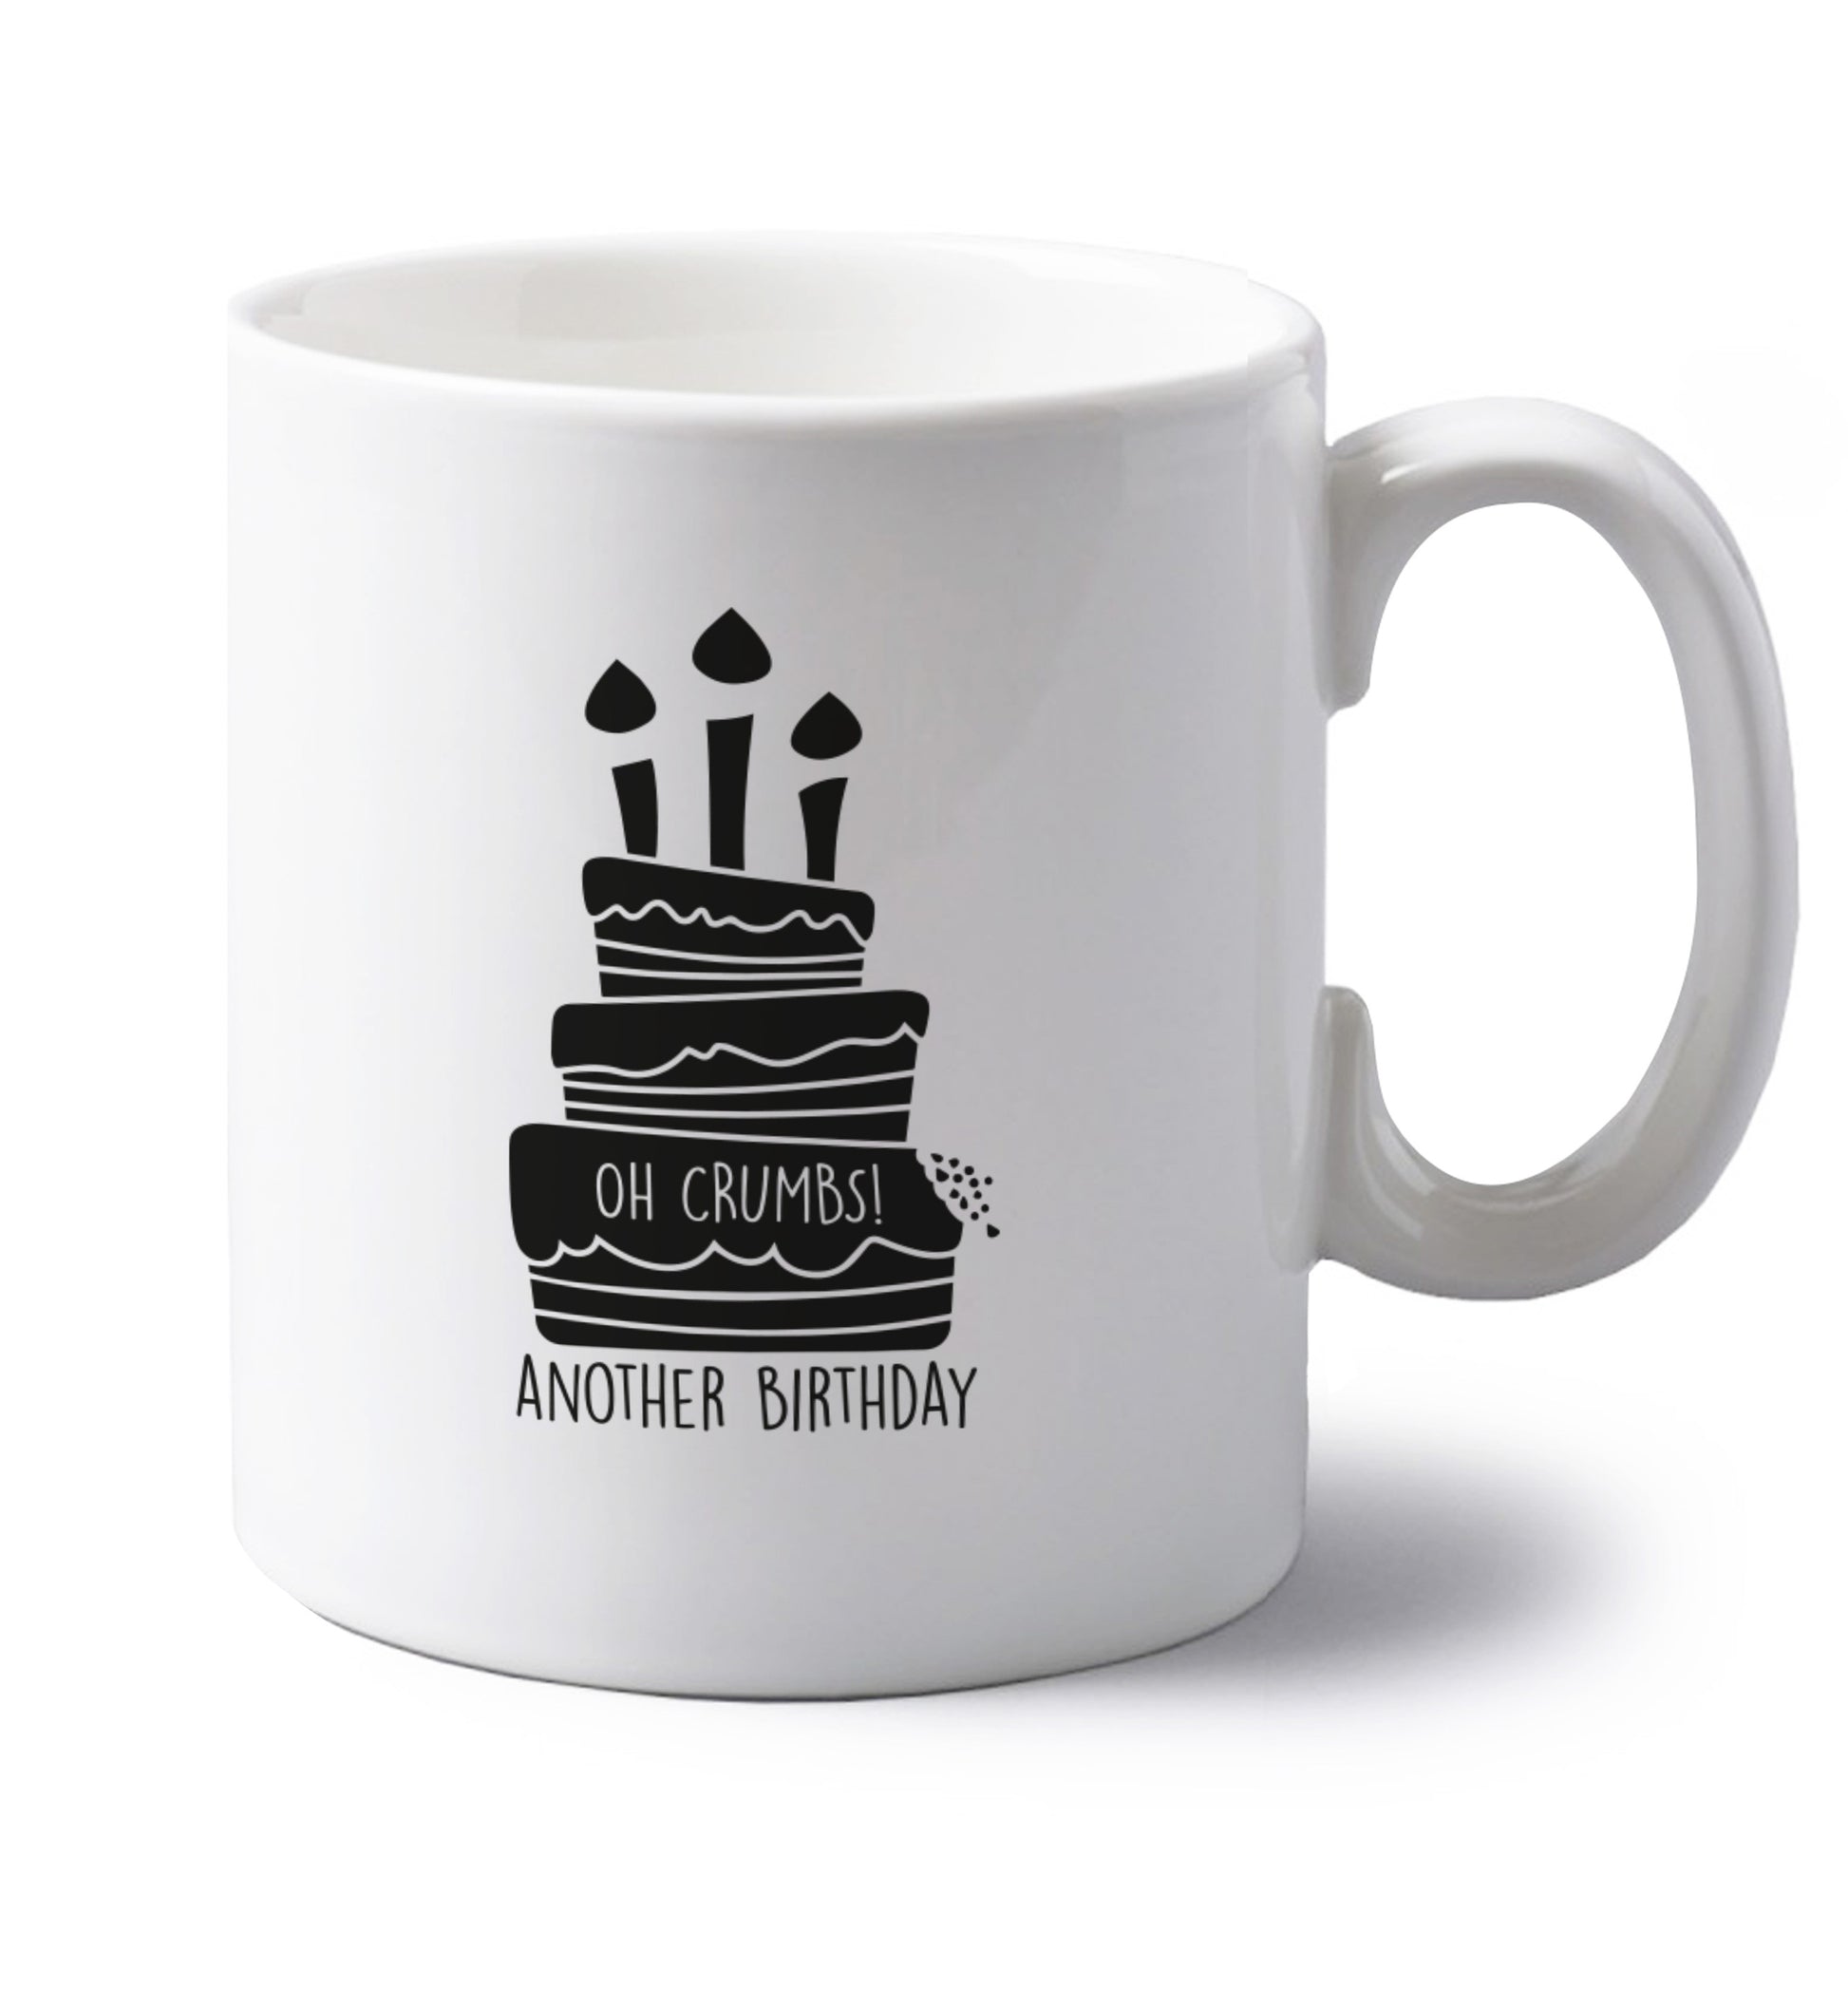 Oh crumbs another birthday! left handed white ceramic mug 